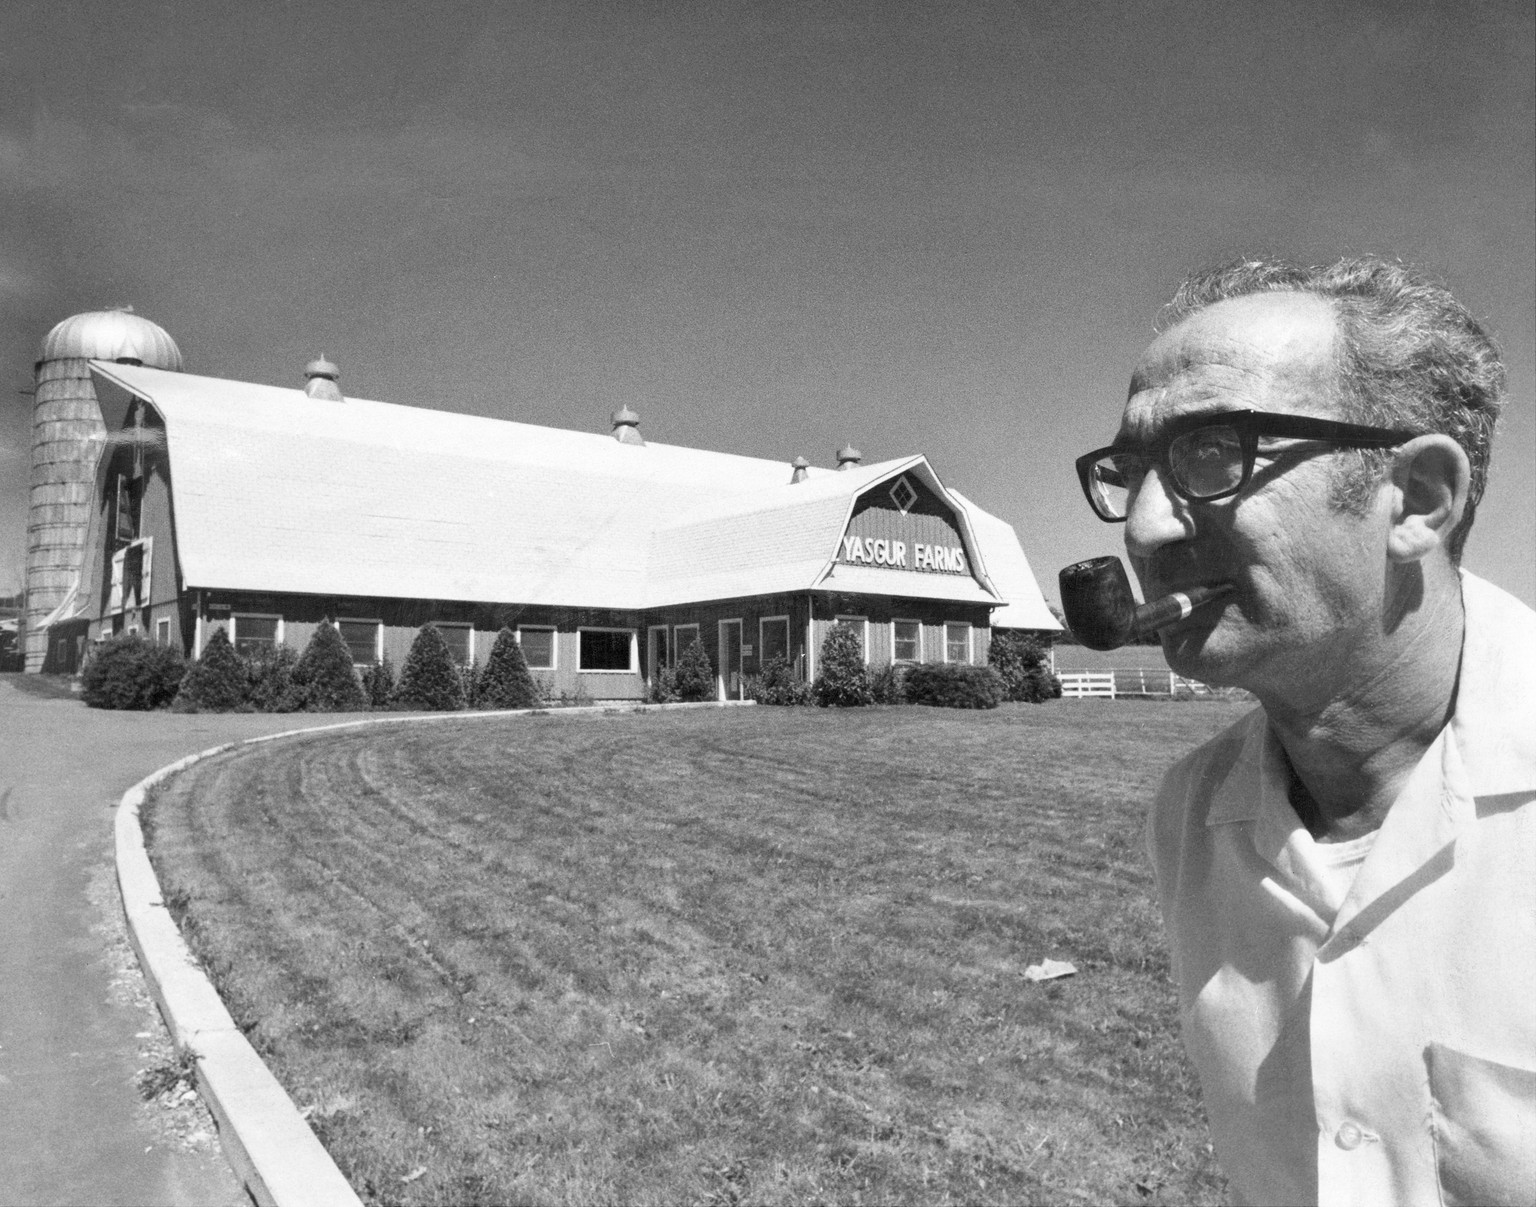 UNITED STATES - AUGUST 22: Max Yasgur, whose land was used for Woodstock festival in Monticello, N.Y. &quot;I&#039;m very happy to get back to running my dairy farm.&quot; He doubts he&#039;ll ever re ...